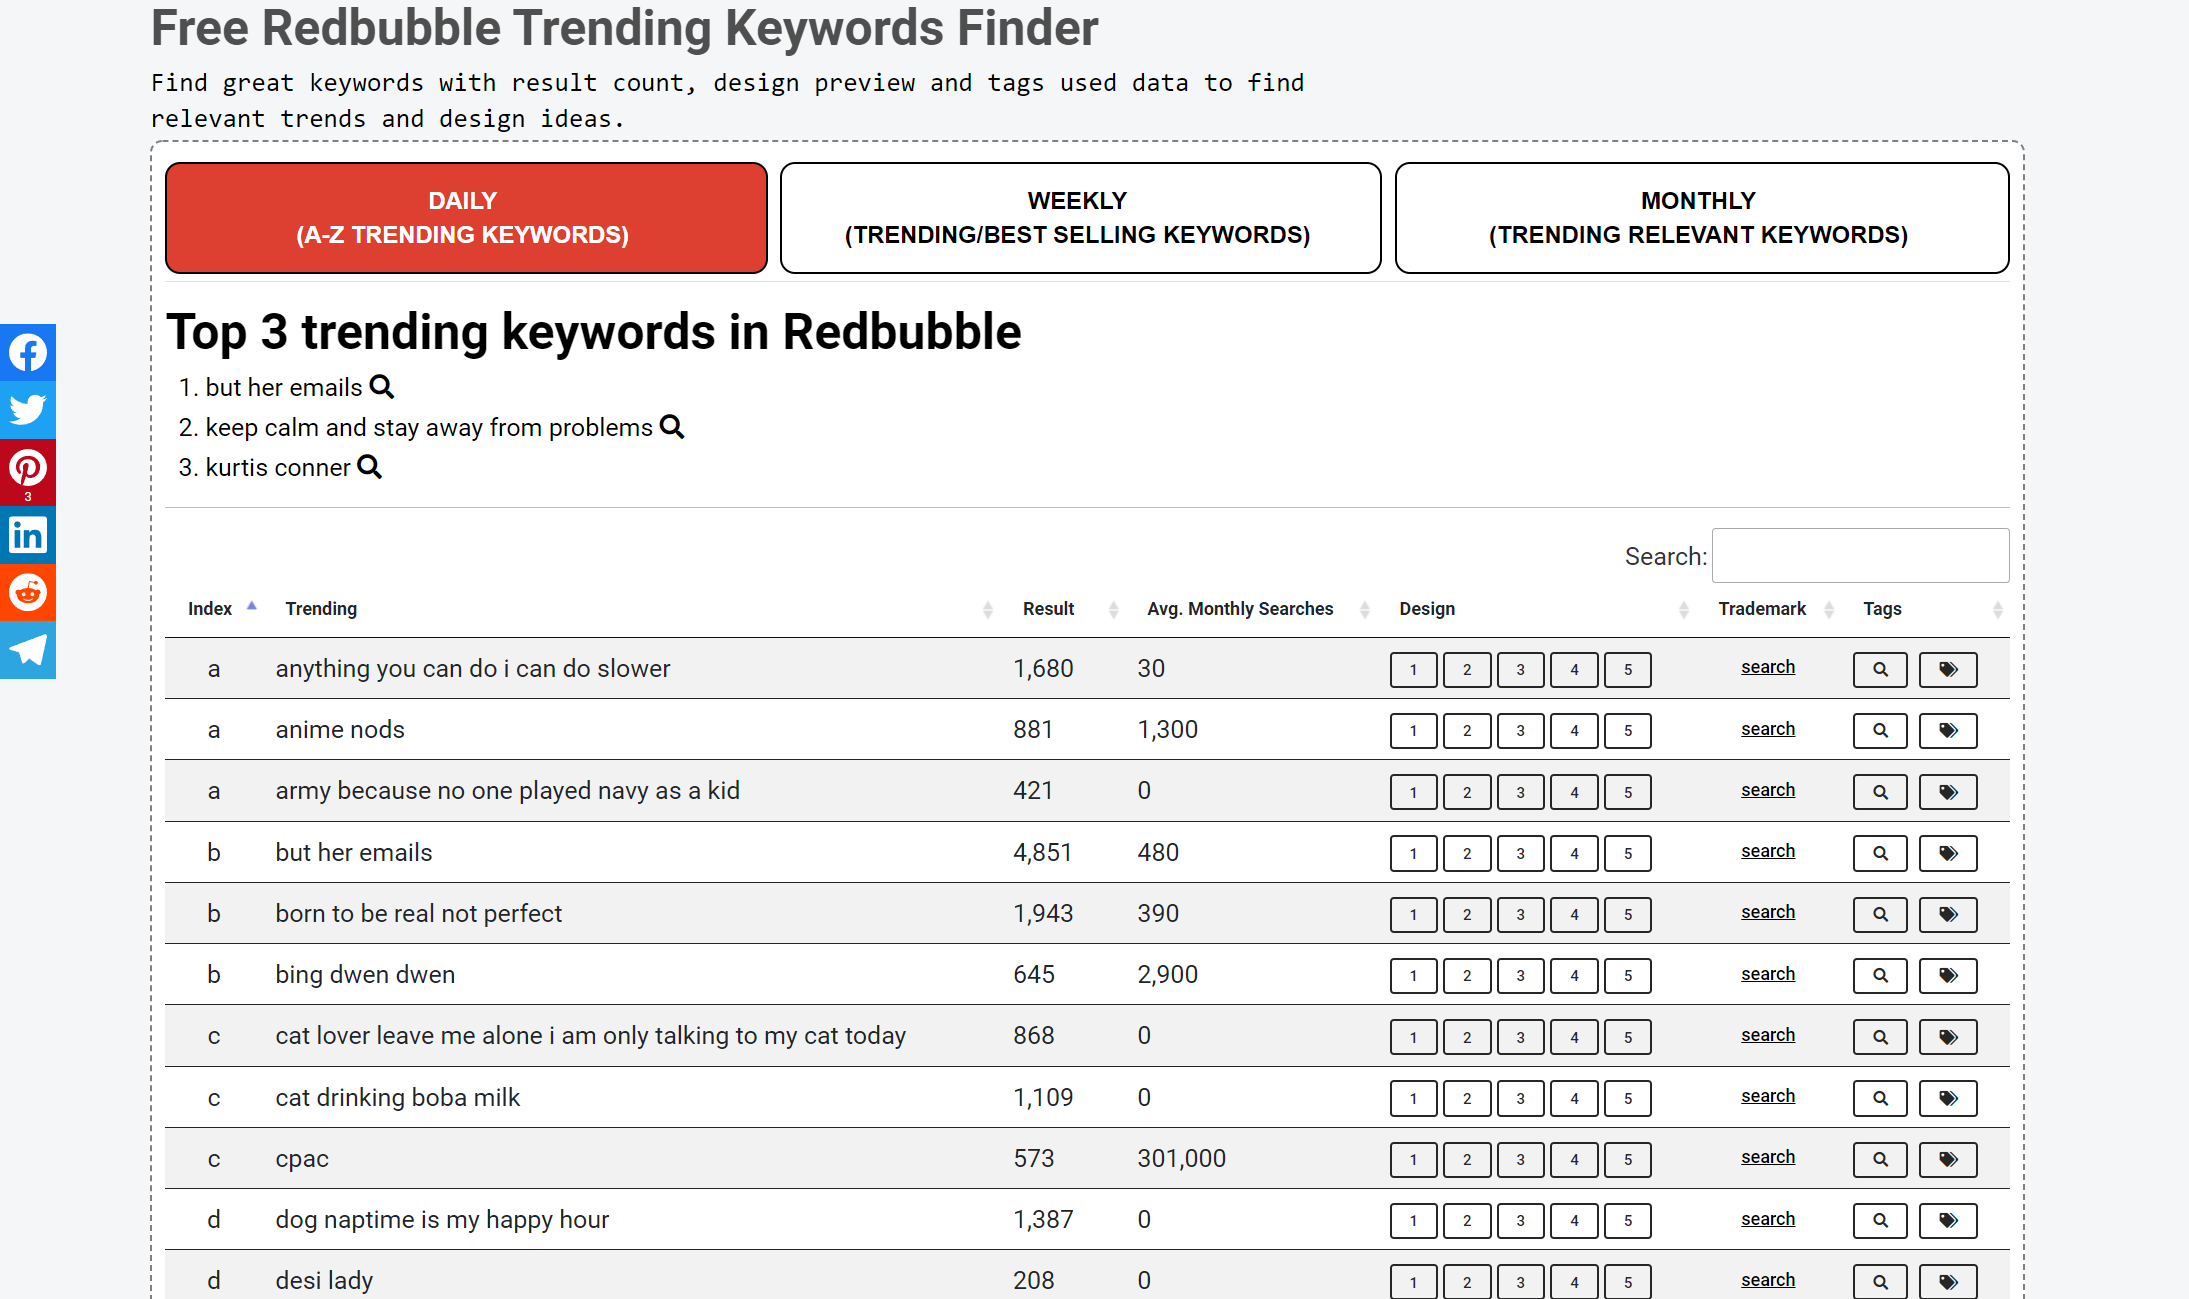 Best Redbubble Tools - Free Redbubble Keyword Finder Tool